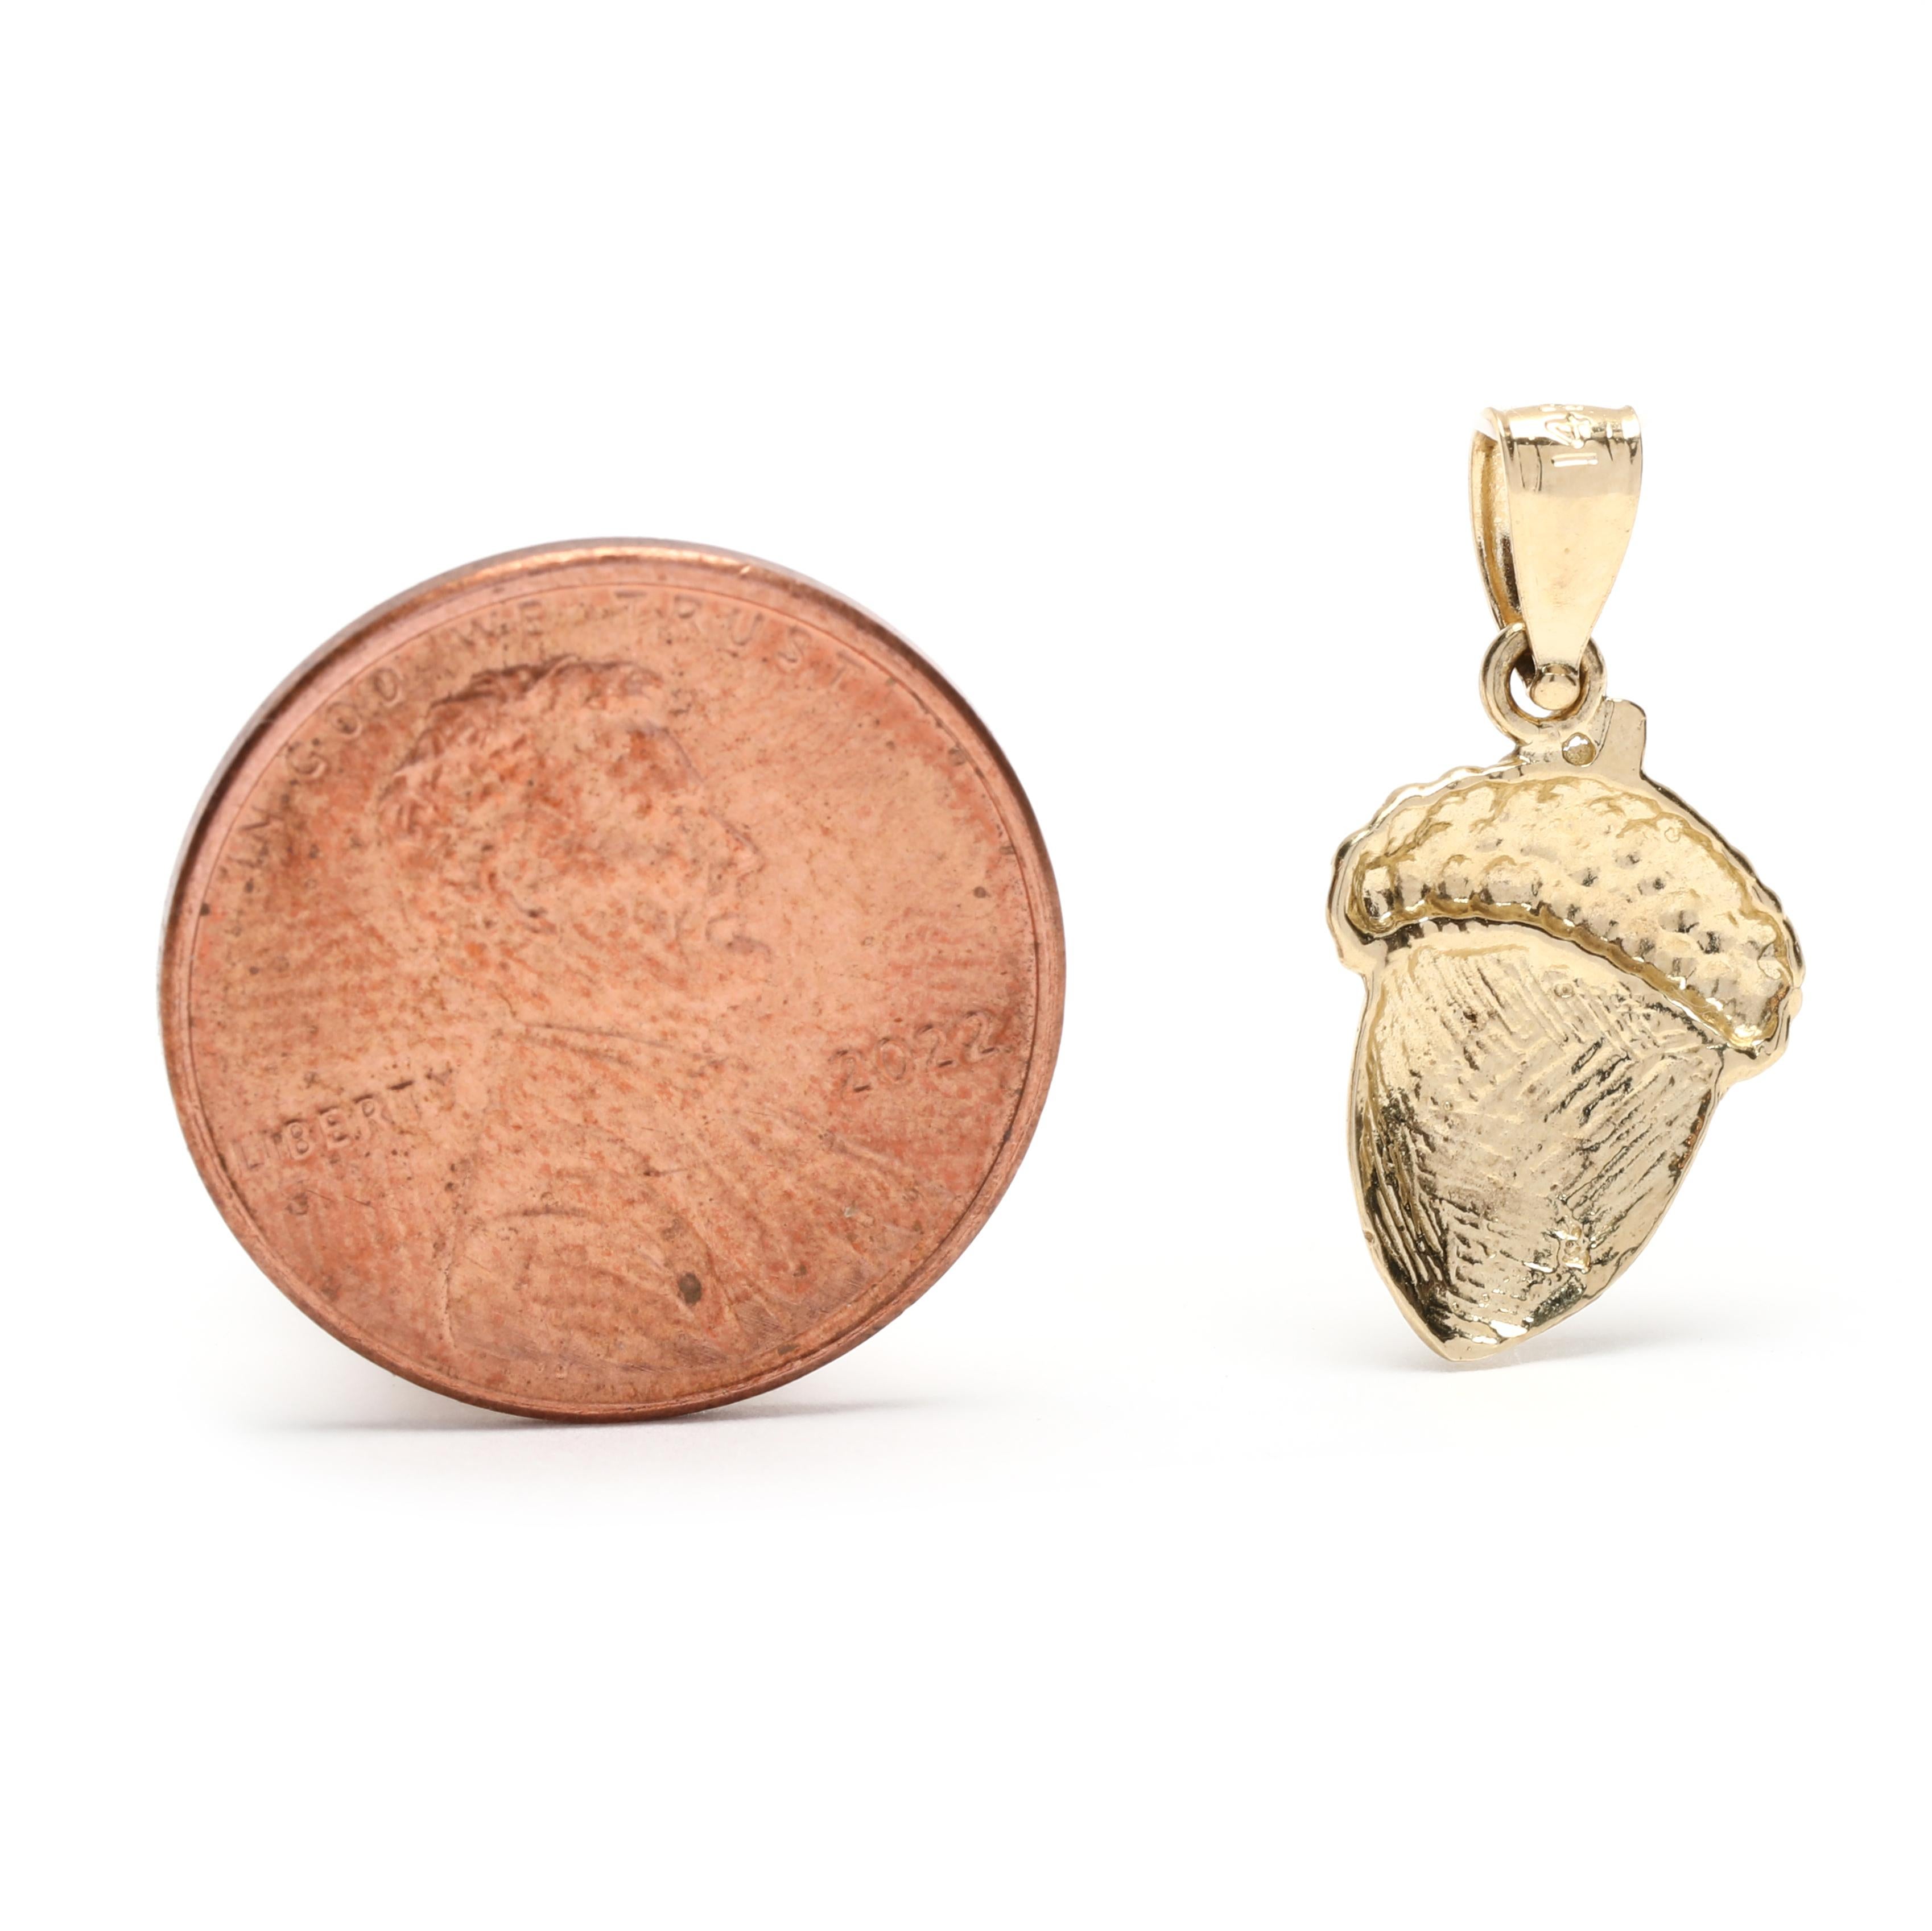 This small flat acorn charm, crafted in 14K yellow gold, is a perfect good luck charm to add to your favorite necklace or bracelet. Our handcrafted charm is 3/4 inch in length and is the perfect size for everyday wear. This dainty charm is a symbol